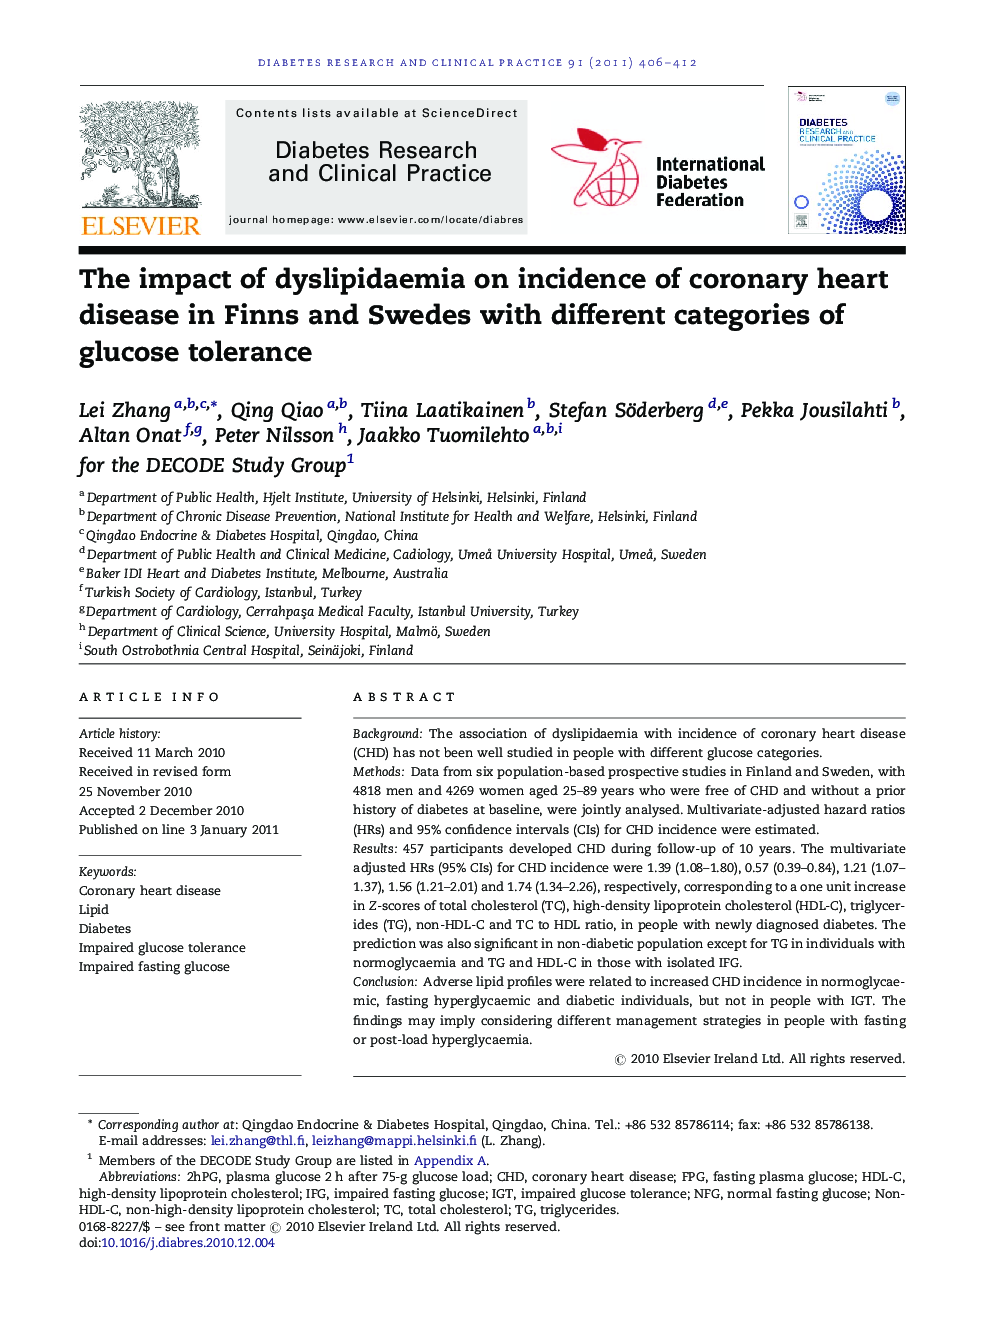 The impact of dyslipidaemia on incidence of coronary heart disease in Finns and Swedes with different categories of glucose tolerance